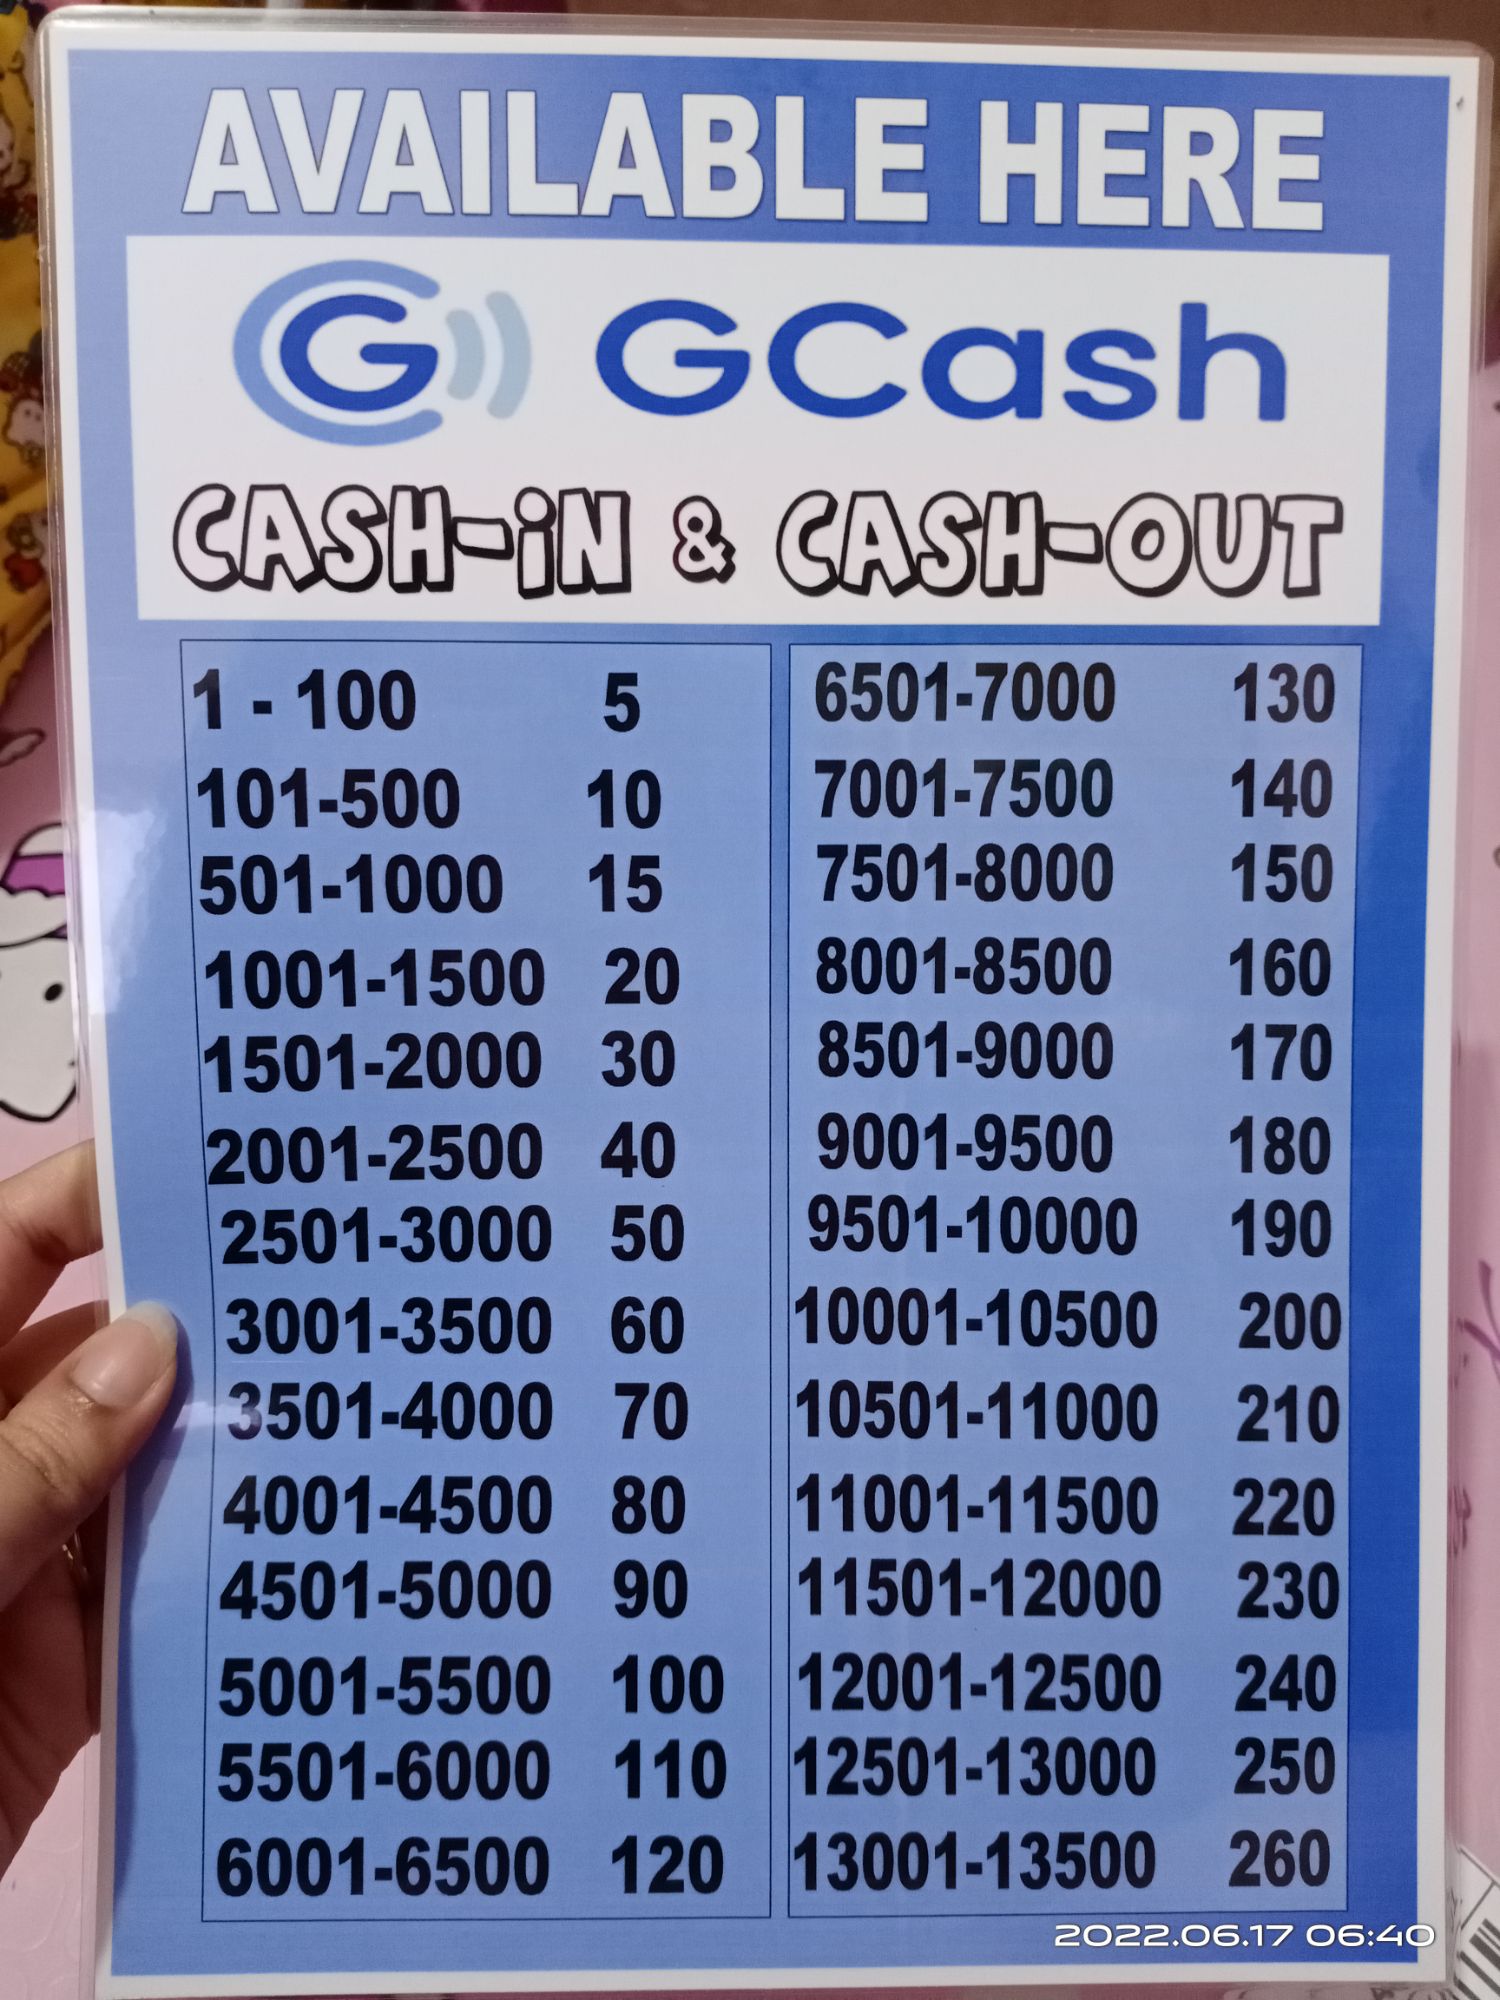 GCASH RATE OR GCASH AVAILABLE HERE LAMINATED (A4 SIZE